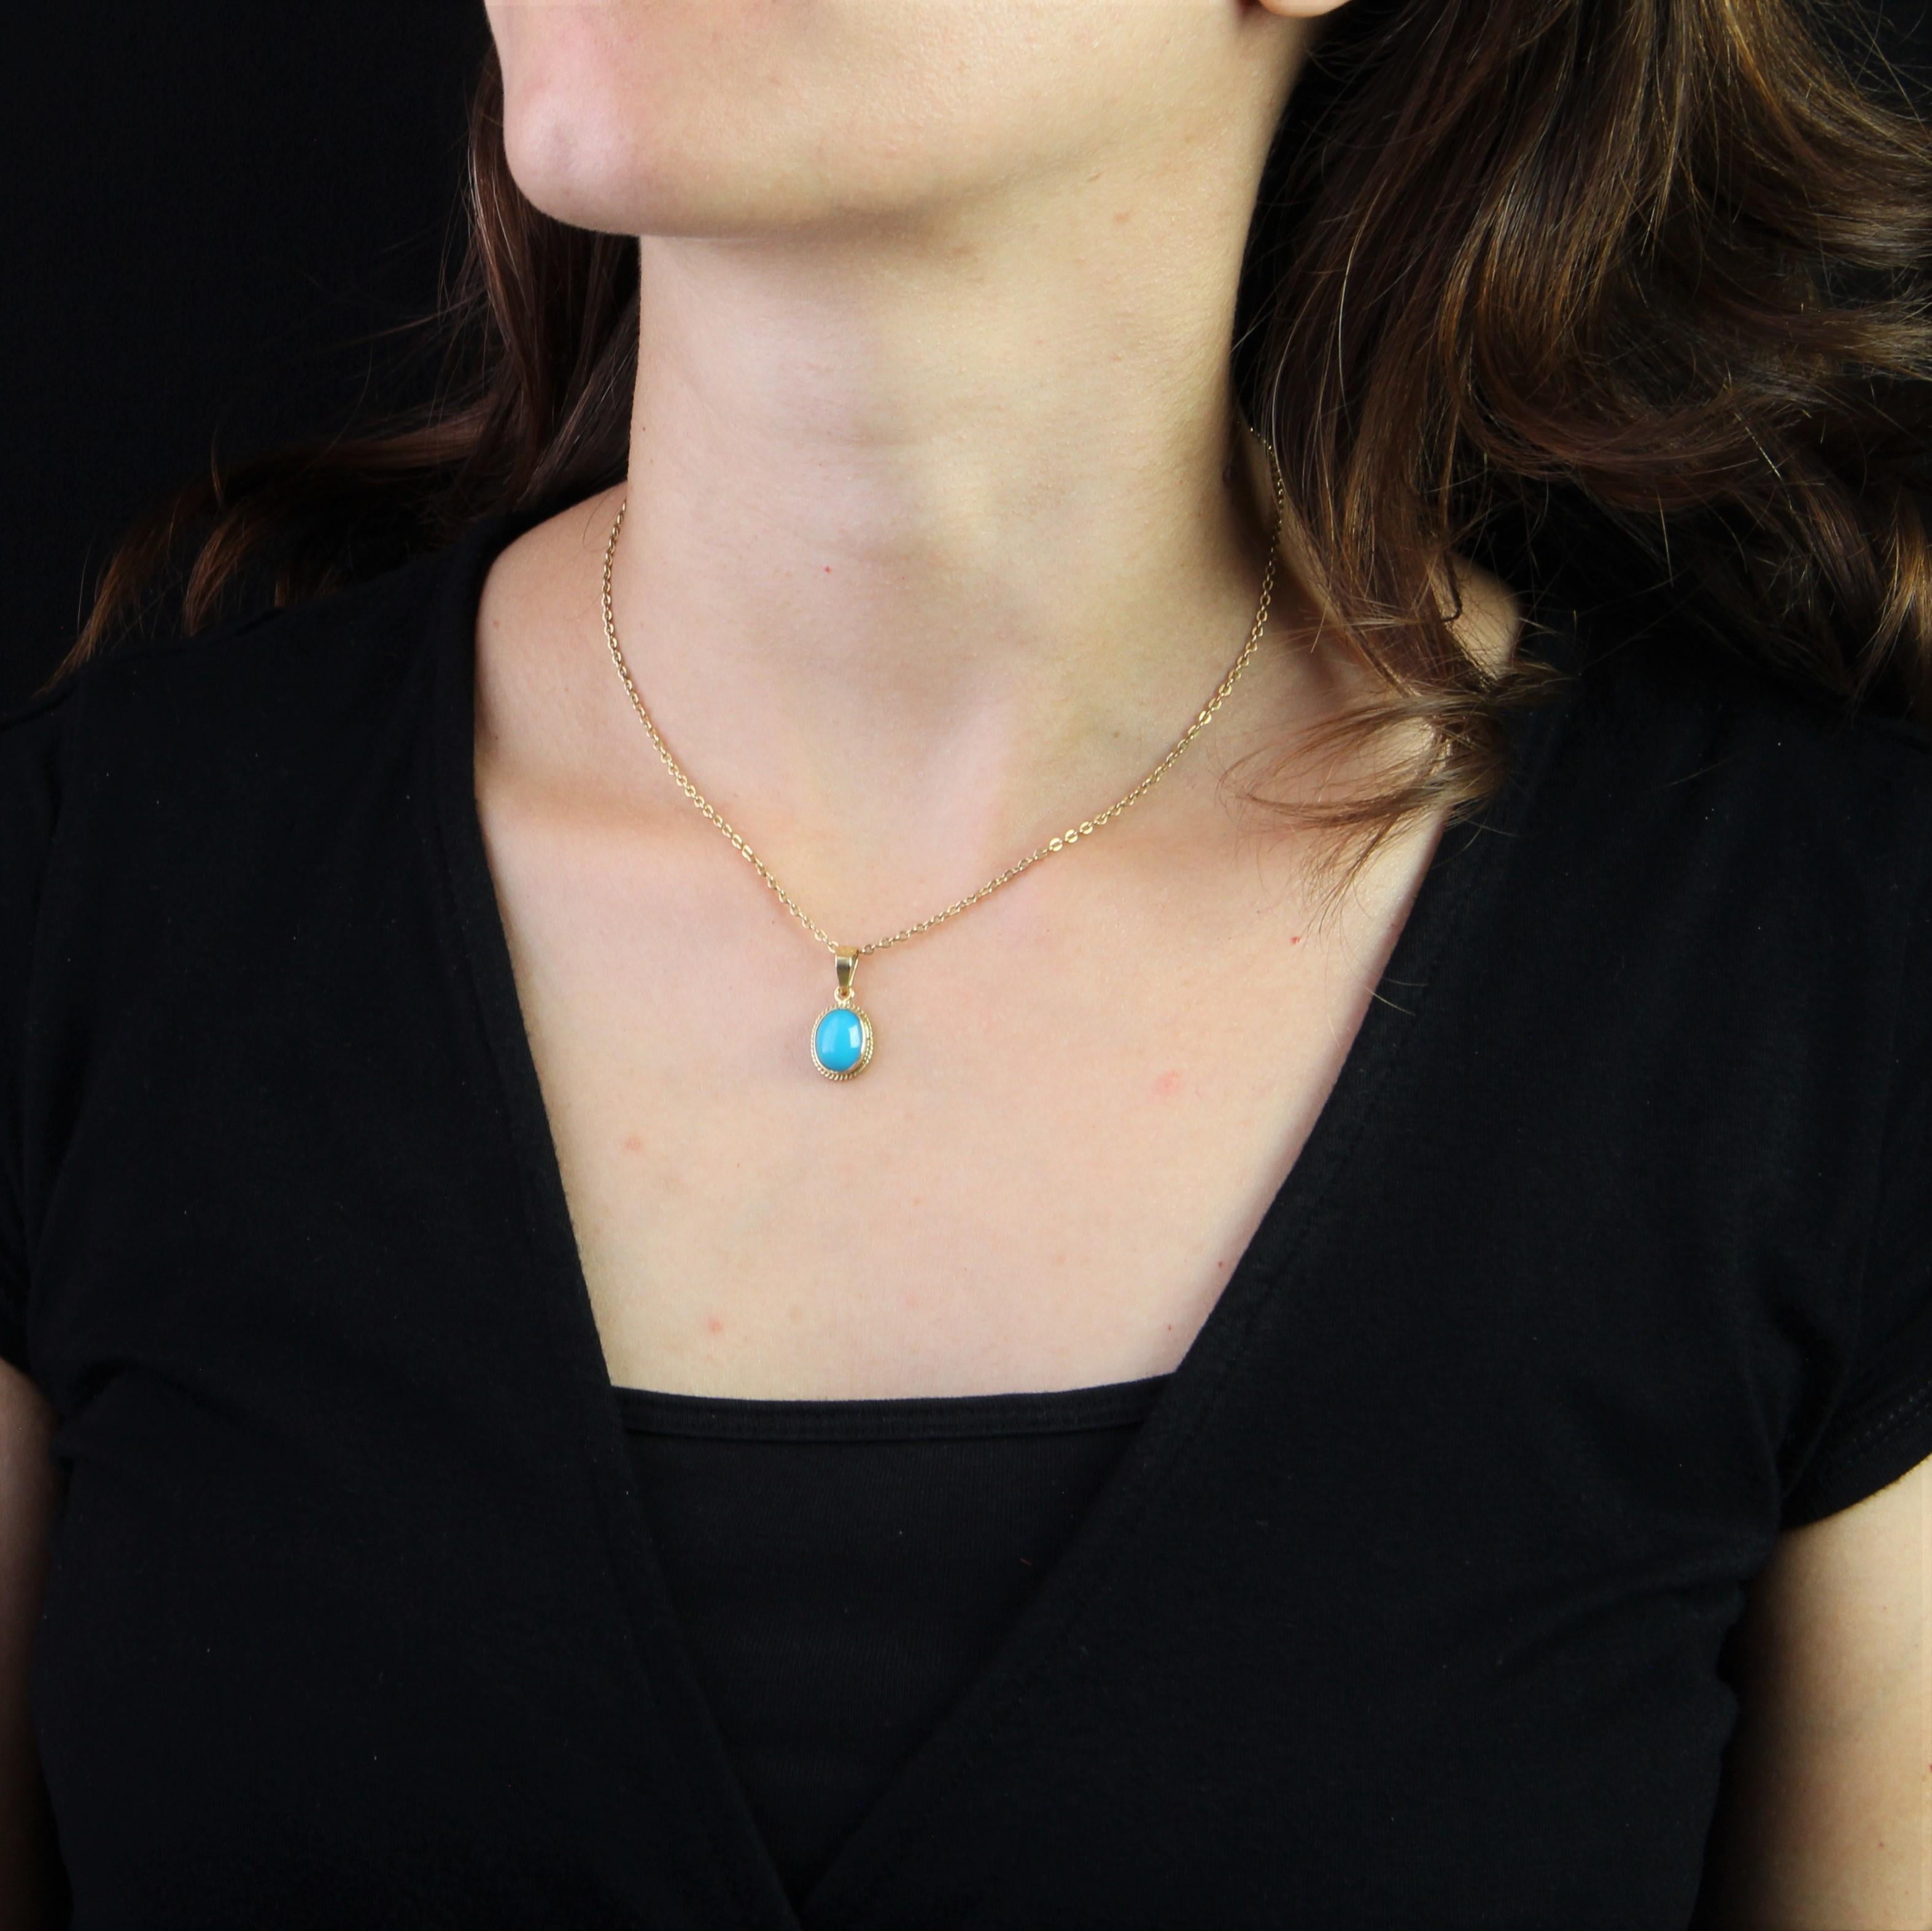 Pendant in 18 karat yellow gold.
This second- hand pendant is composed of a turquoise color cabochon stone in closed setting and surrounded by a yellow gold cord.
Height : 2,2 cm, width : 10,2 mm, thickness : 4,6 mm approximately.
Total weight of